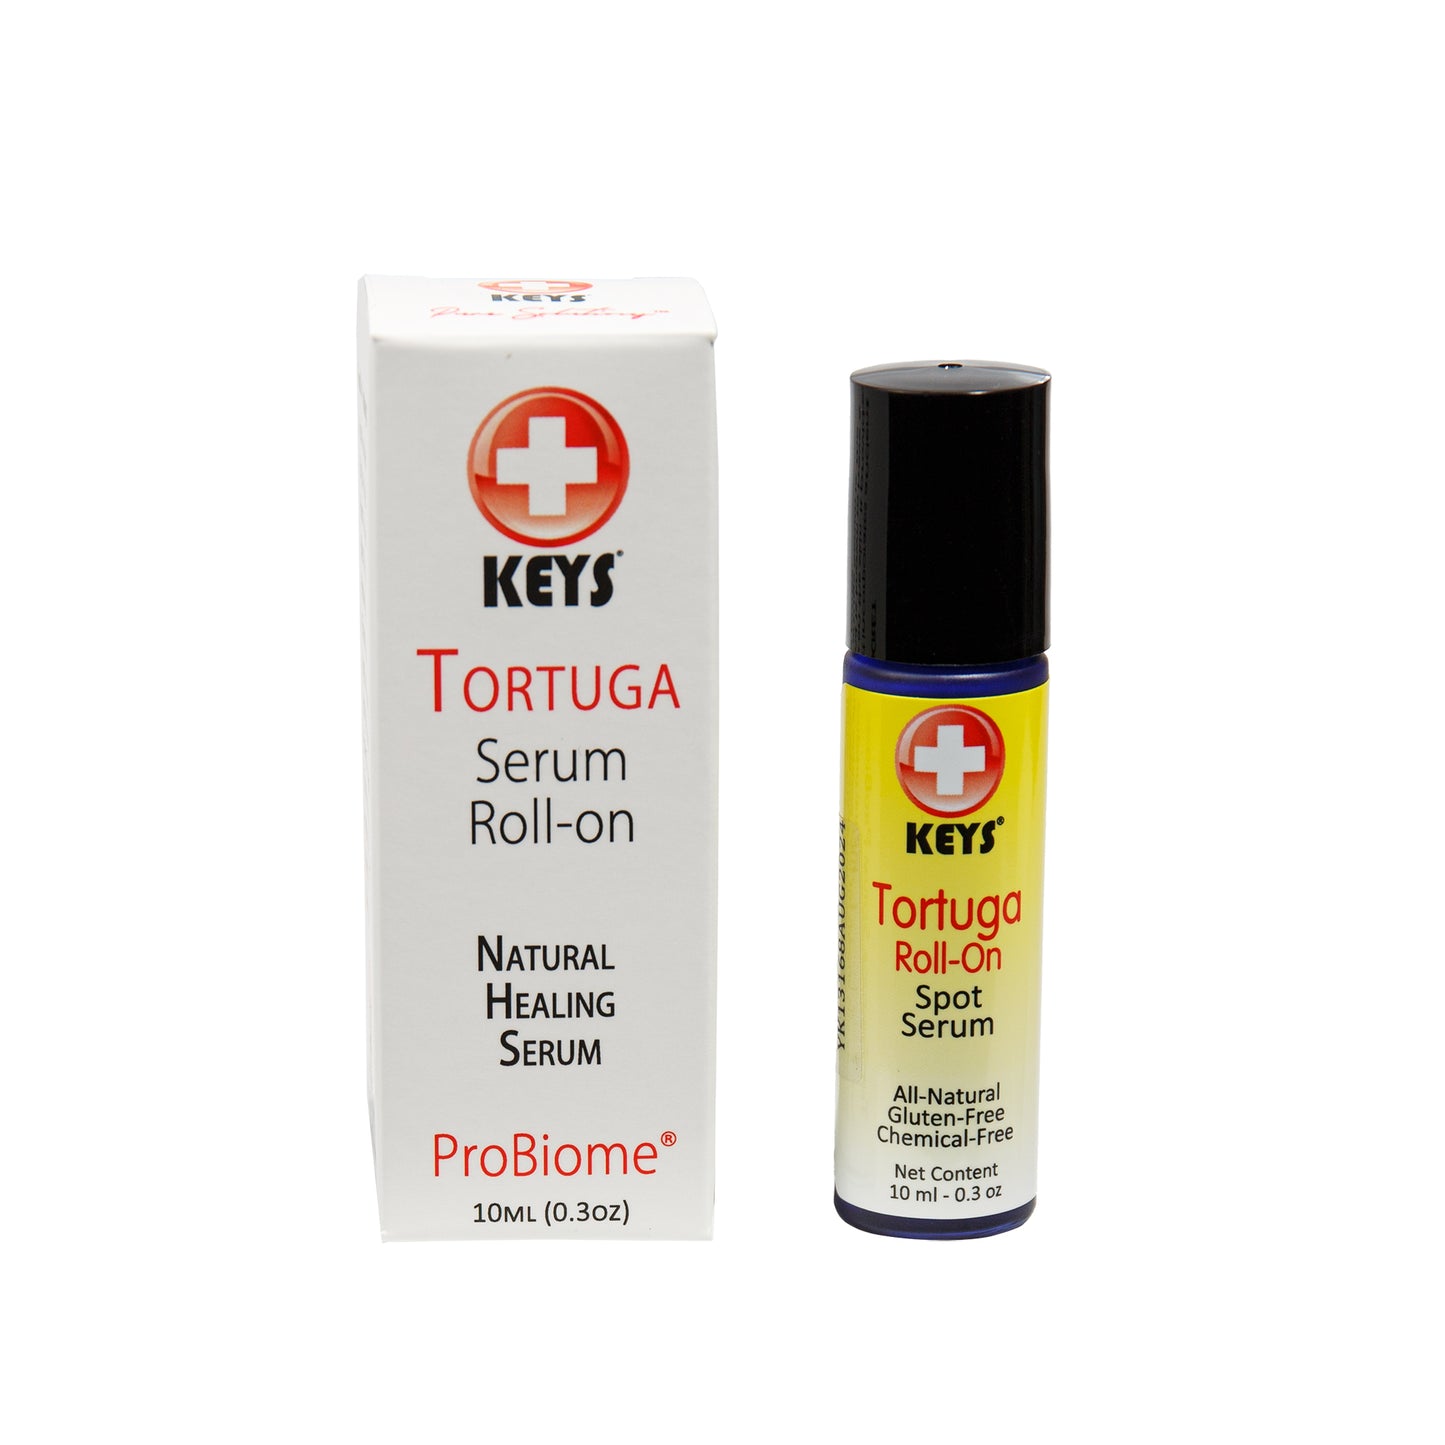 Primary image of Tortuga Roll-On